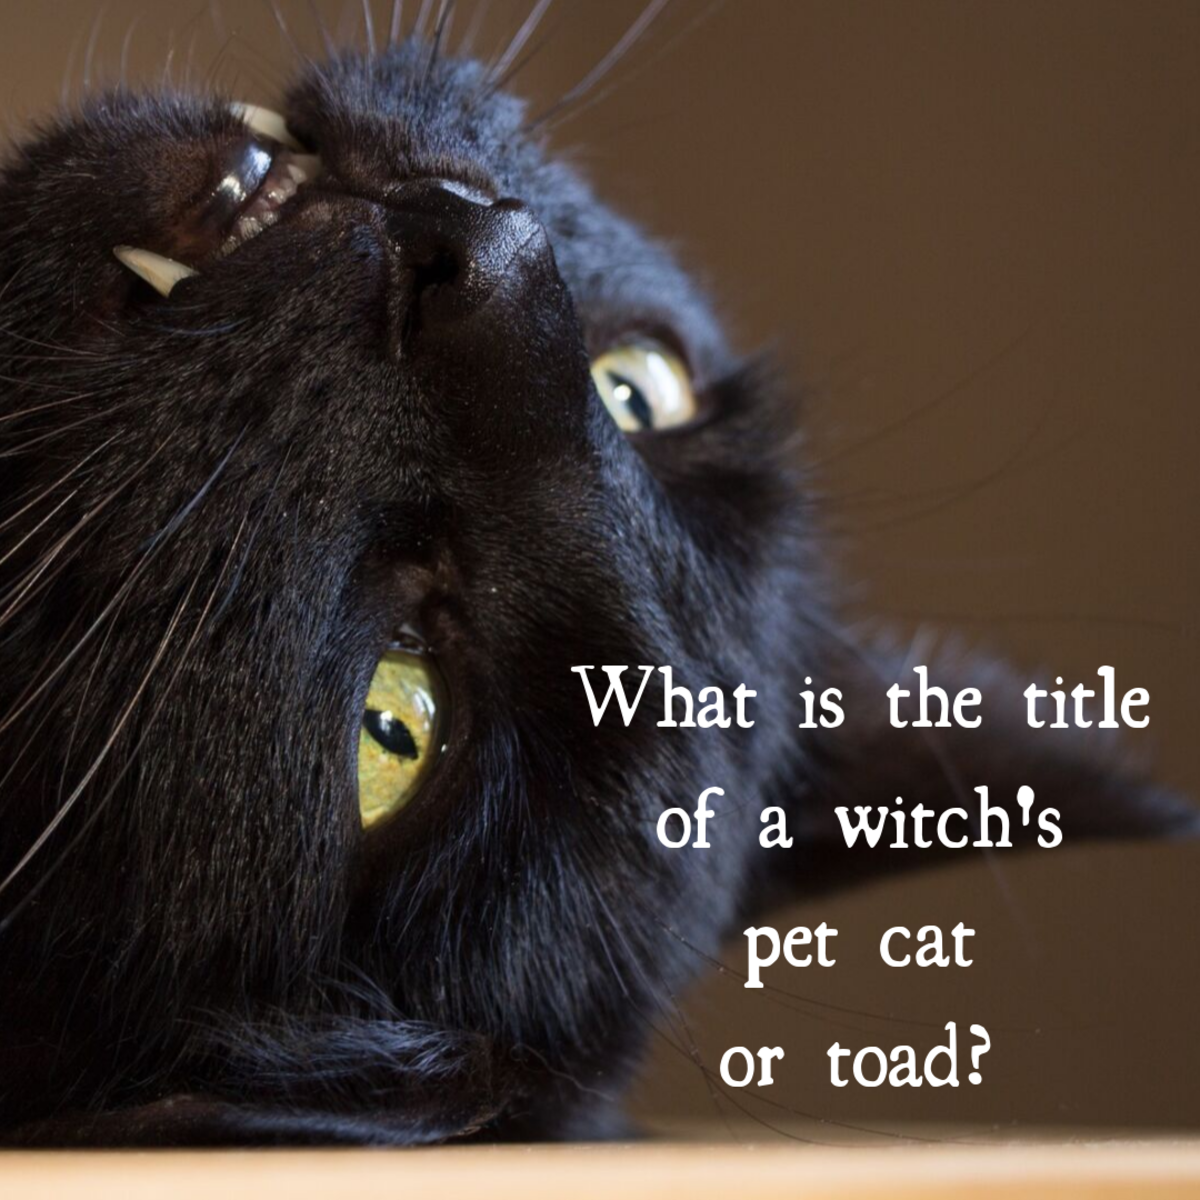 What is the title of a witch’s pet cat or toad? Answer: a familiar.